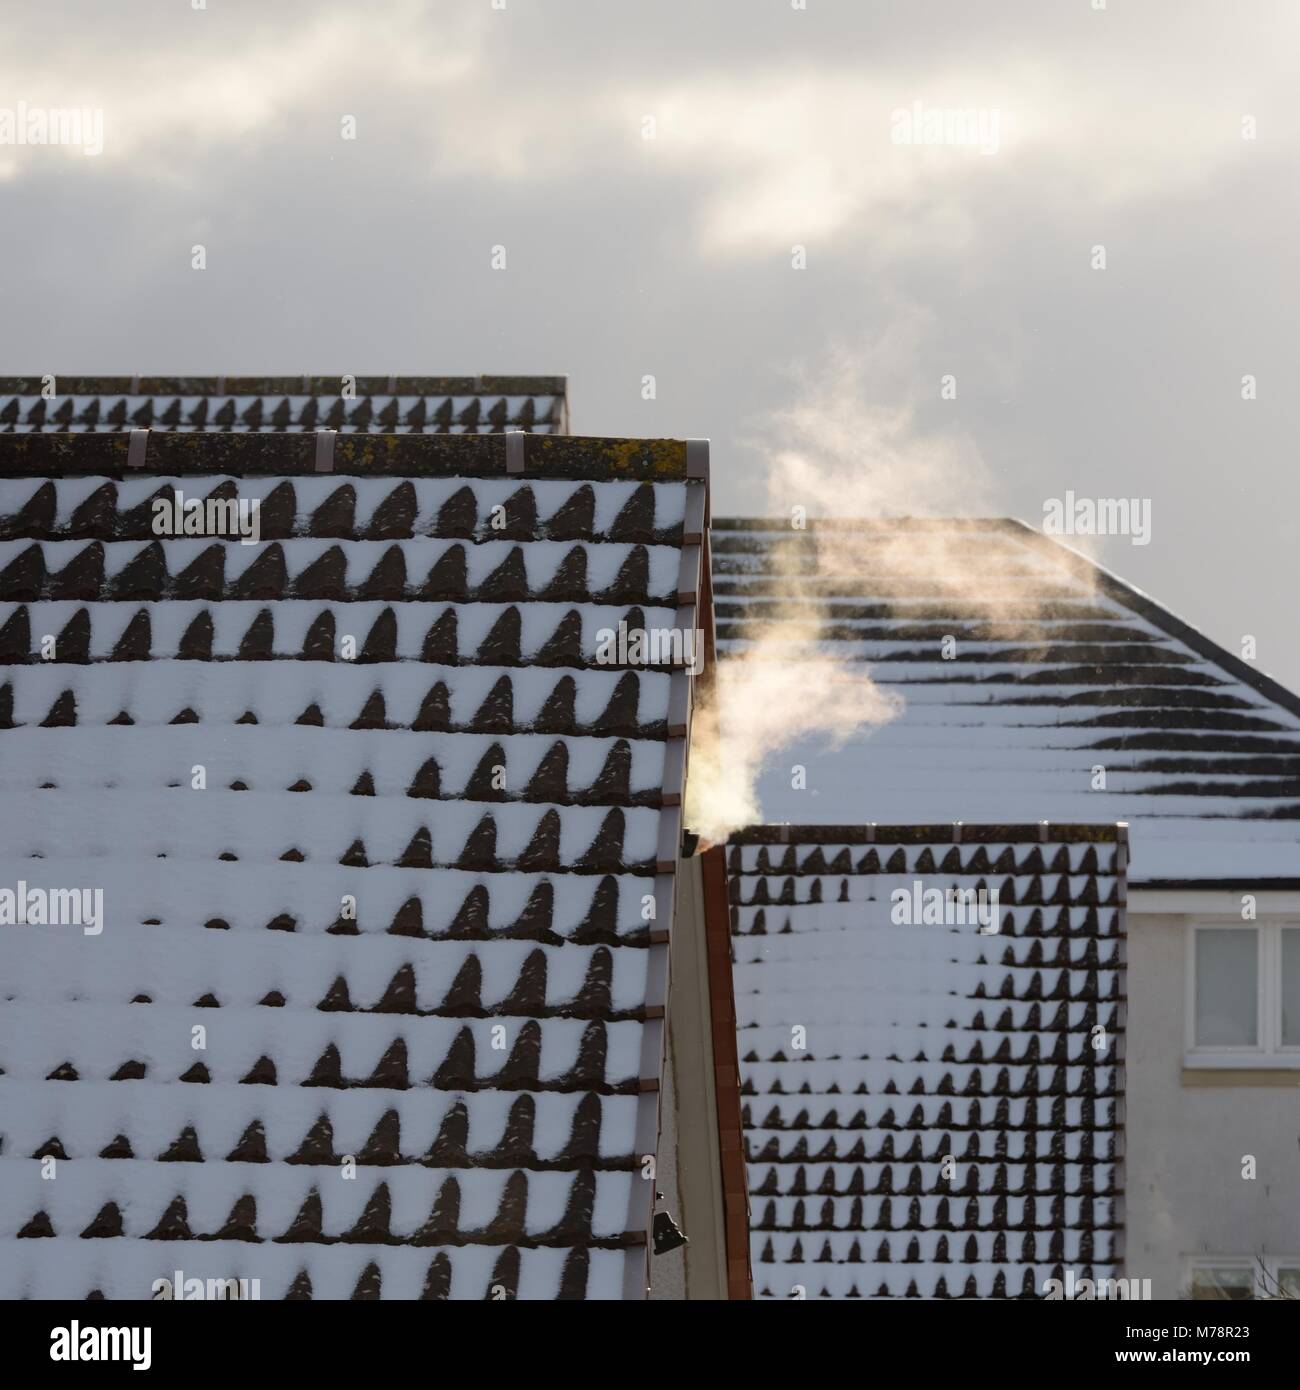 Steam from a heating vent drifts over rooftops covered in snow during cold weather in Scotland, UK Stock Photo